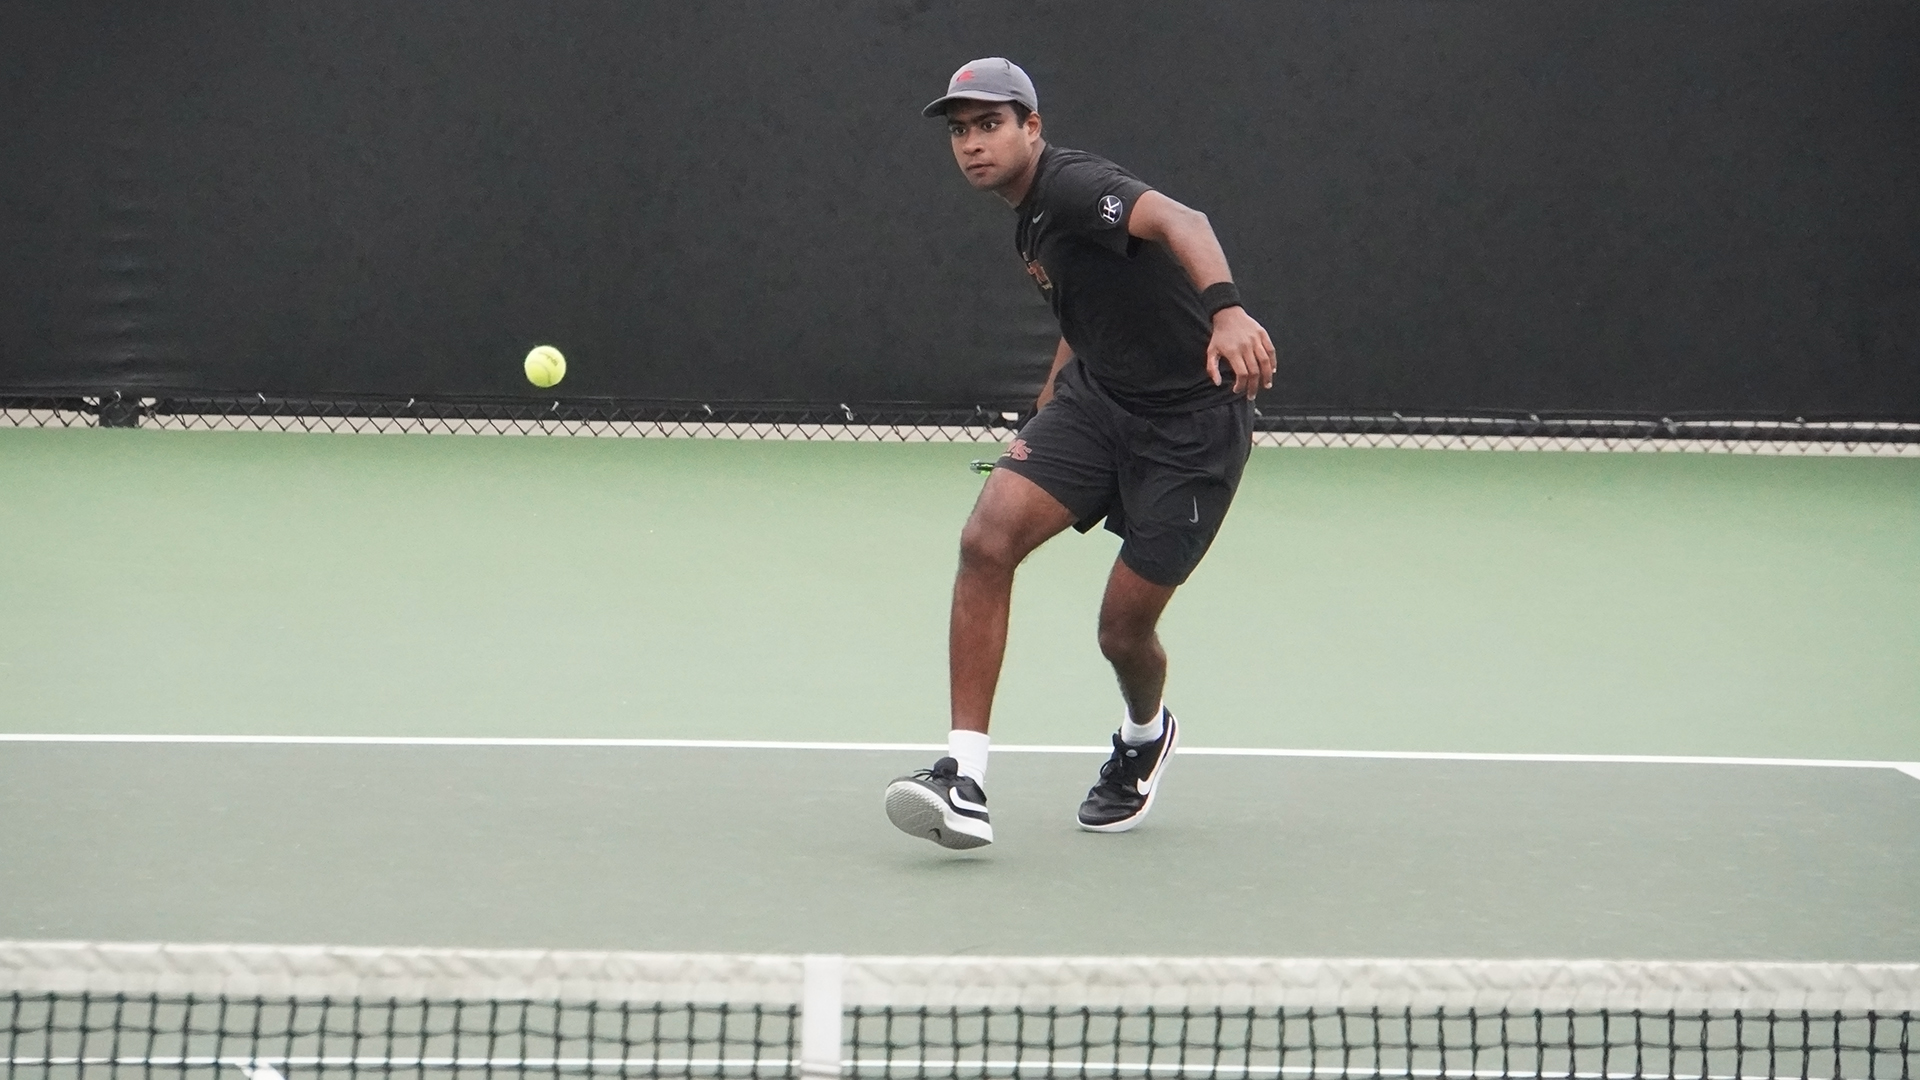 Anirudh Gupta lost only 8 games combined in two singles wins